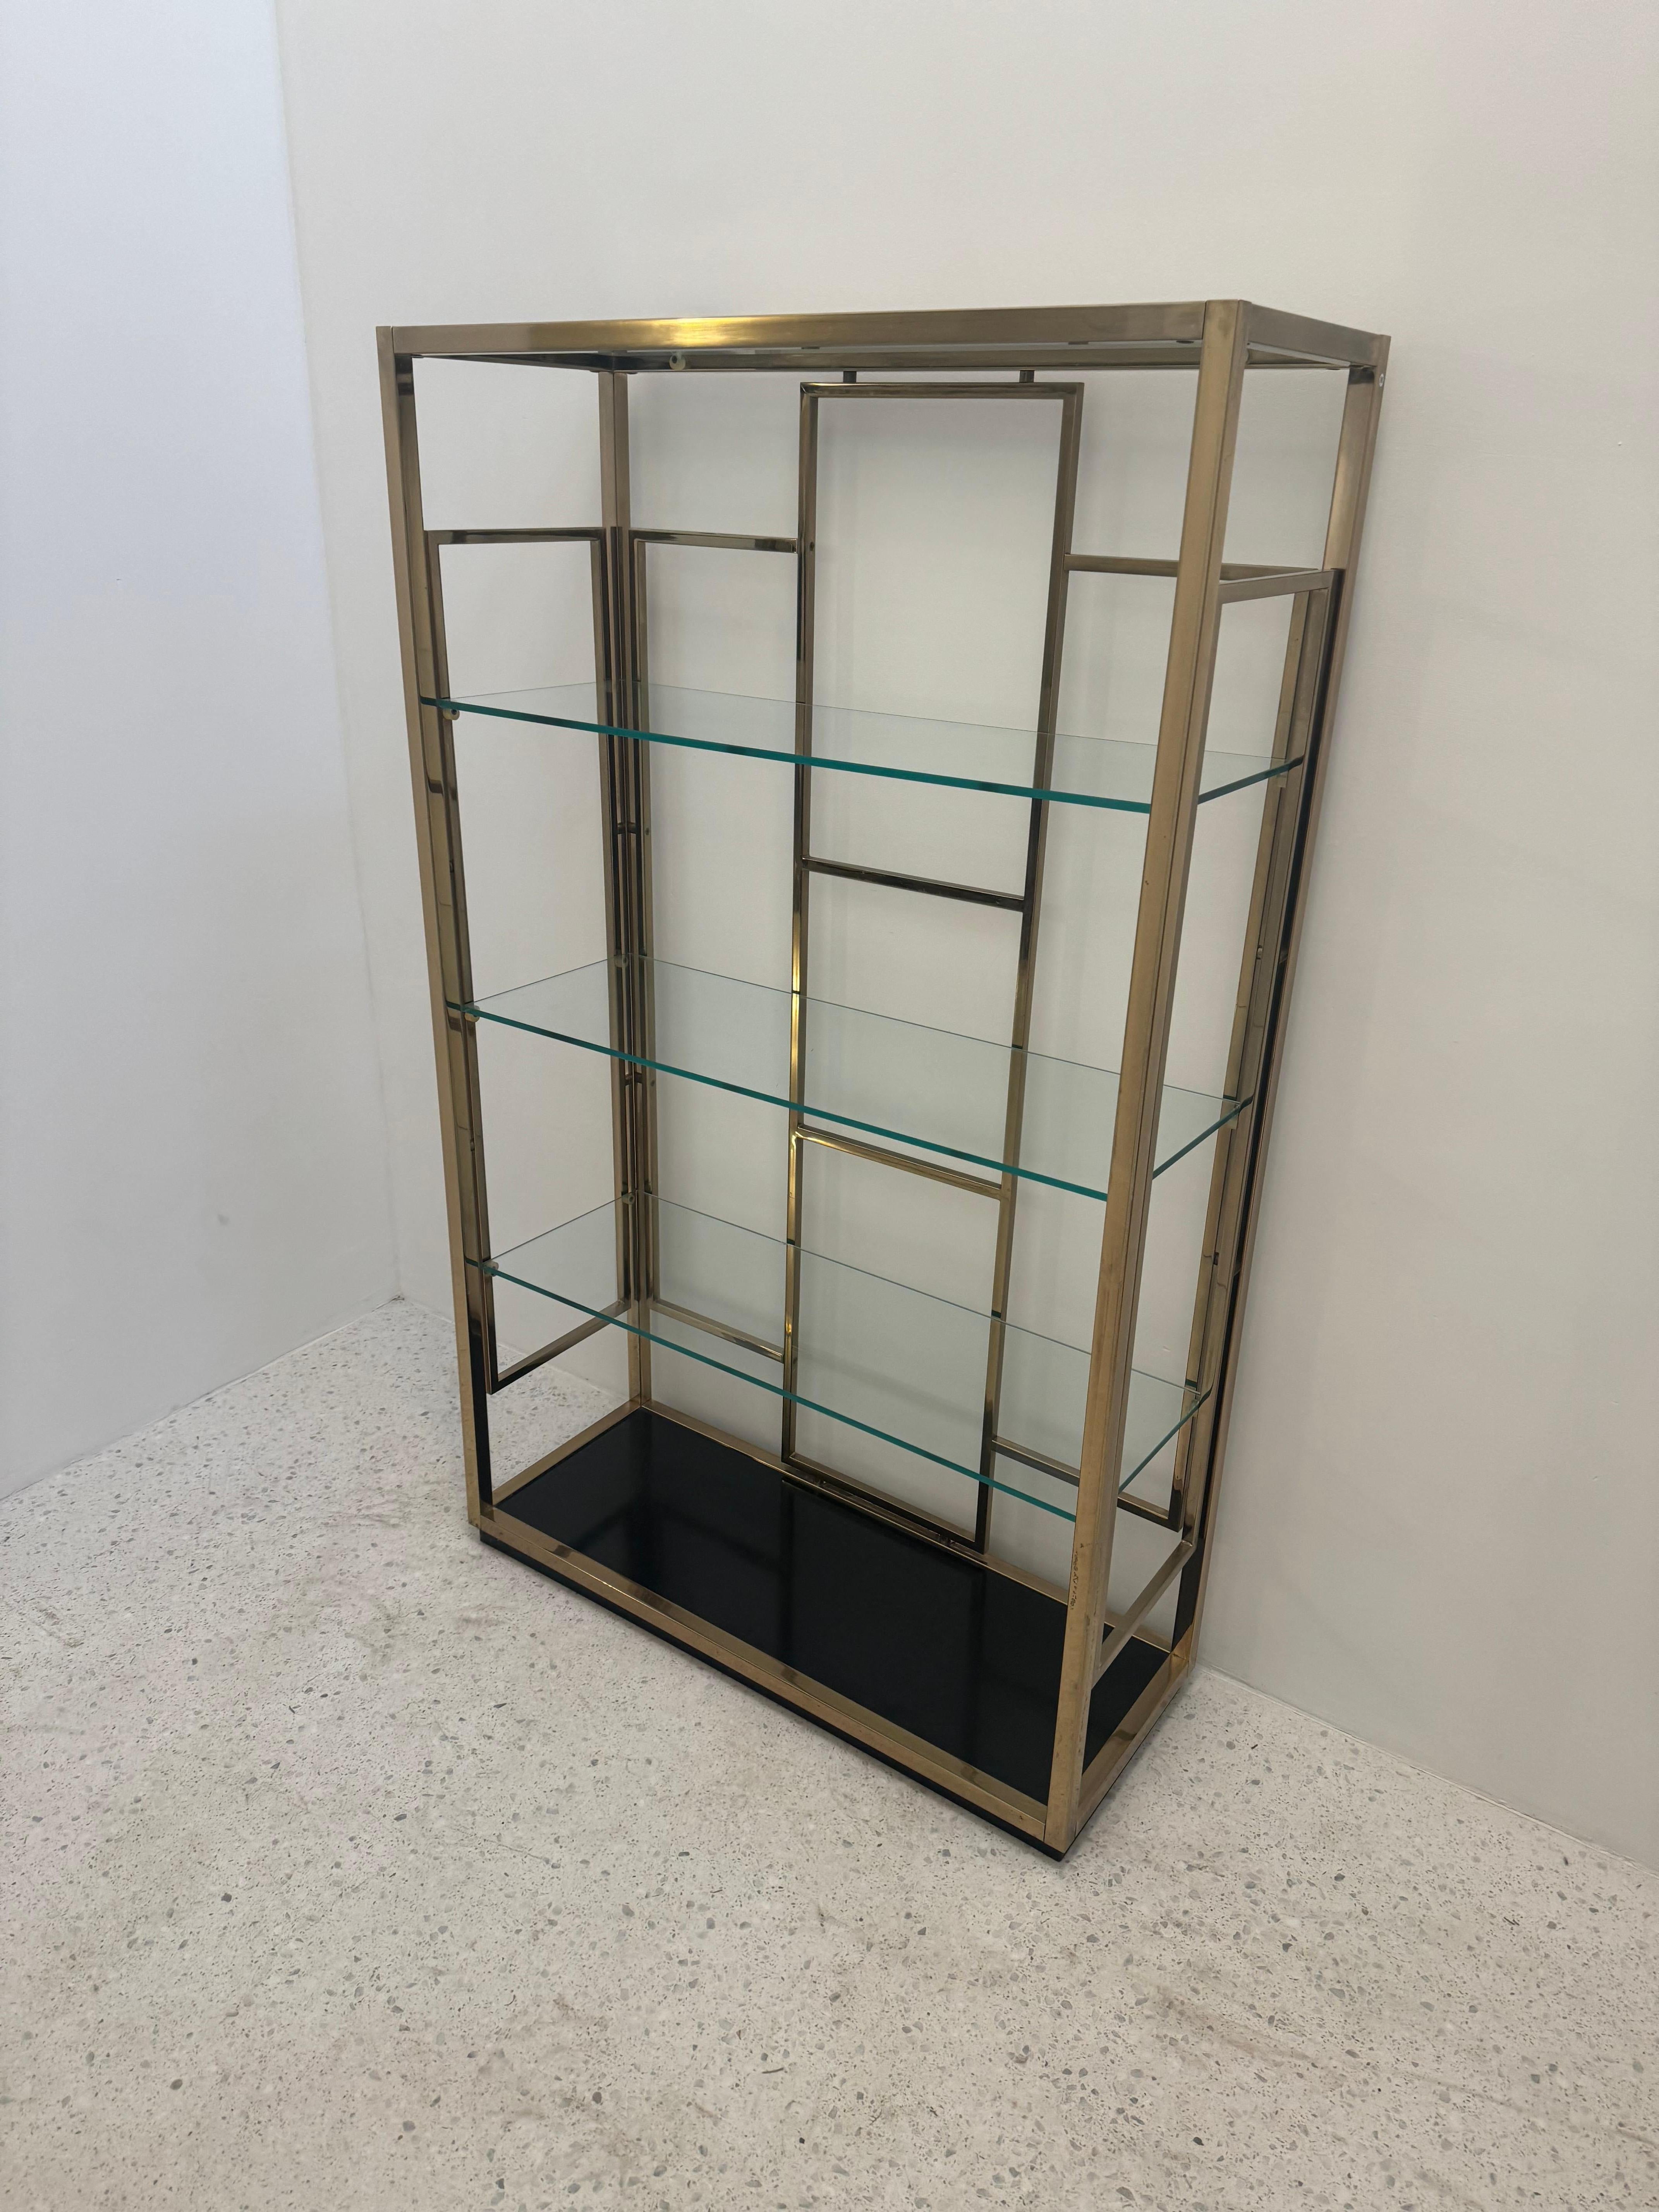 Shelf with a gilded metal structure made up of rectangular panels and three glass shelves.